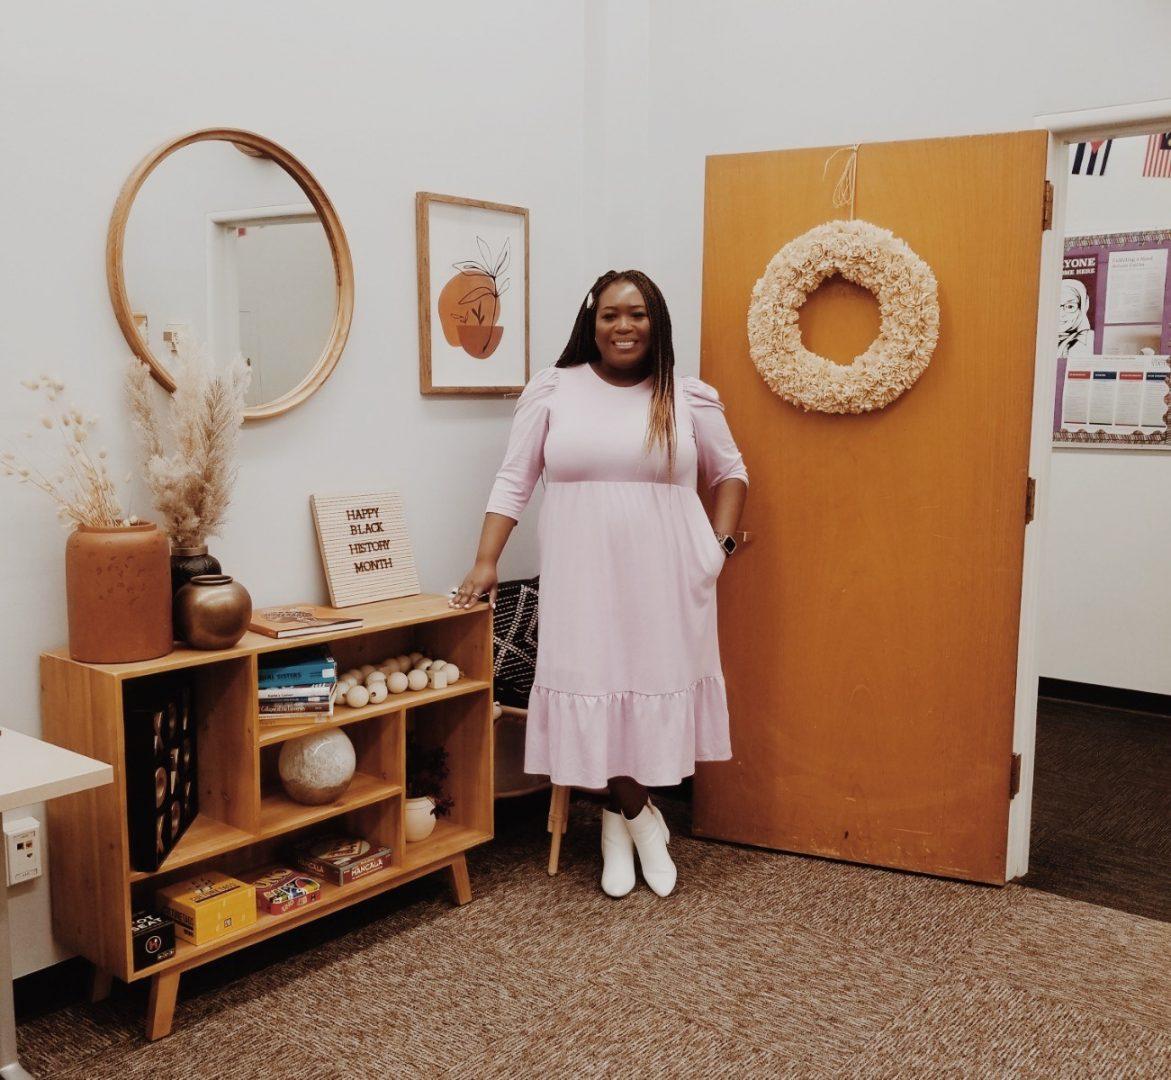 Former Fresno State African American Programs and Services (AFAM) program coordinator, Brianna White, poses inside the Harambee room, located in room 109 of the Thomas building. (Courtesy of Brianna White)